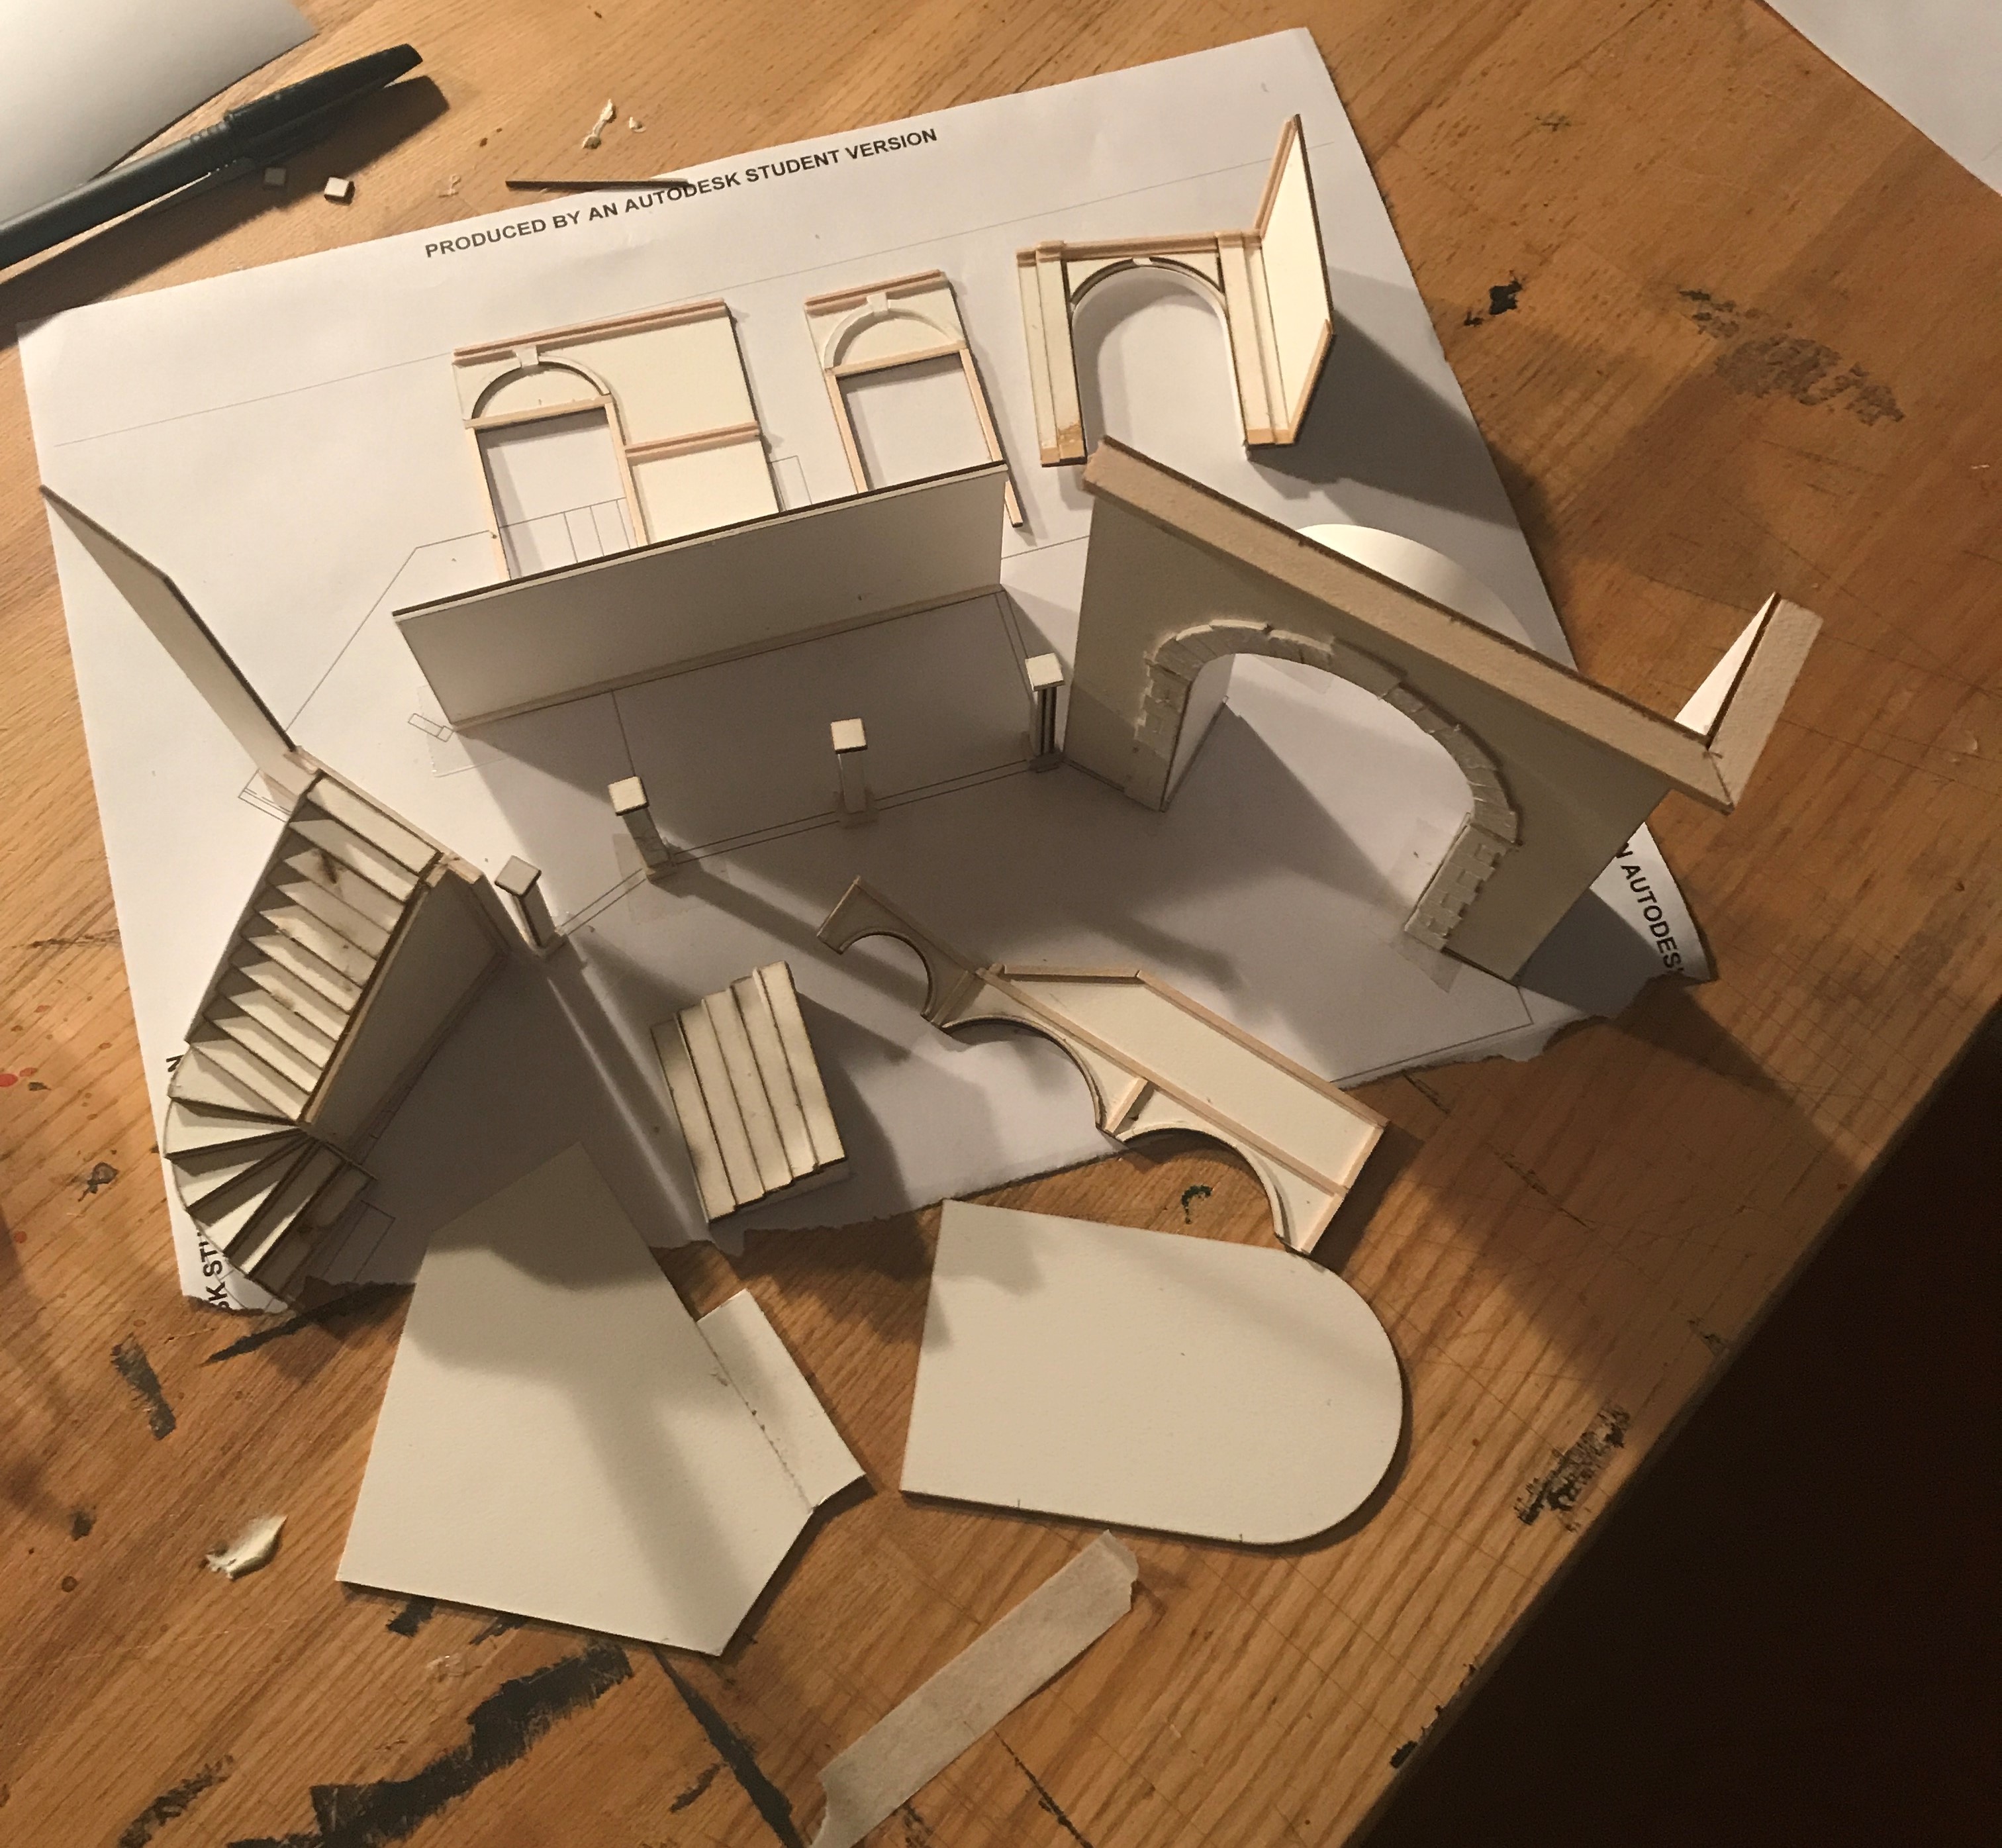 Process model for scenic design concept for "The Rover", scenic design by Tara Huffman